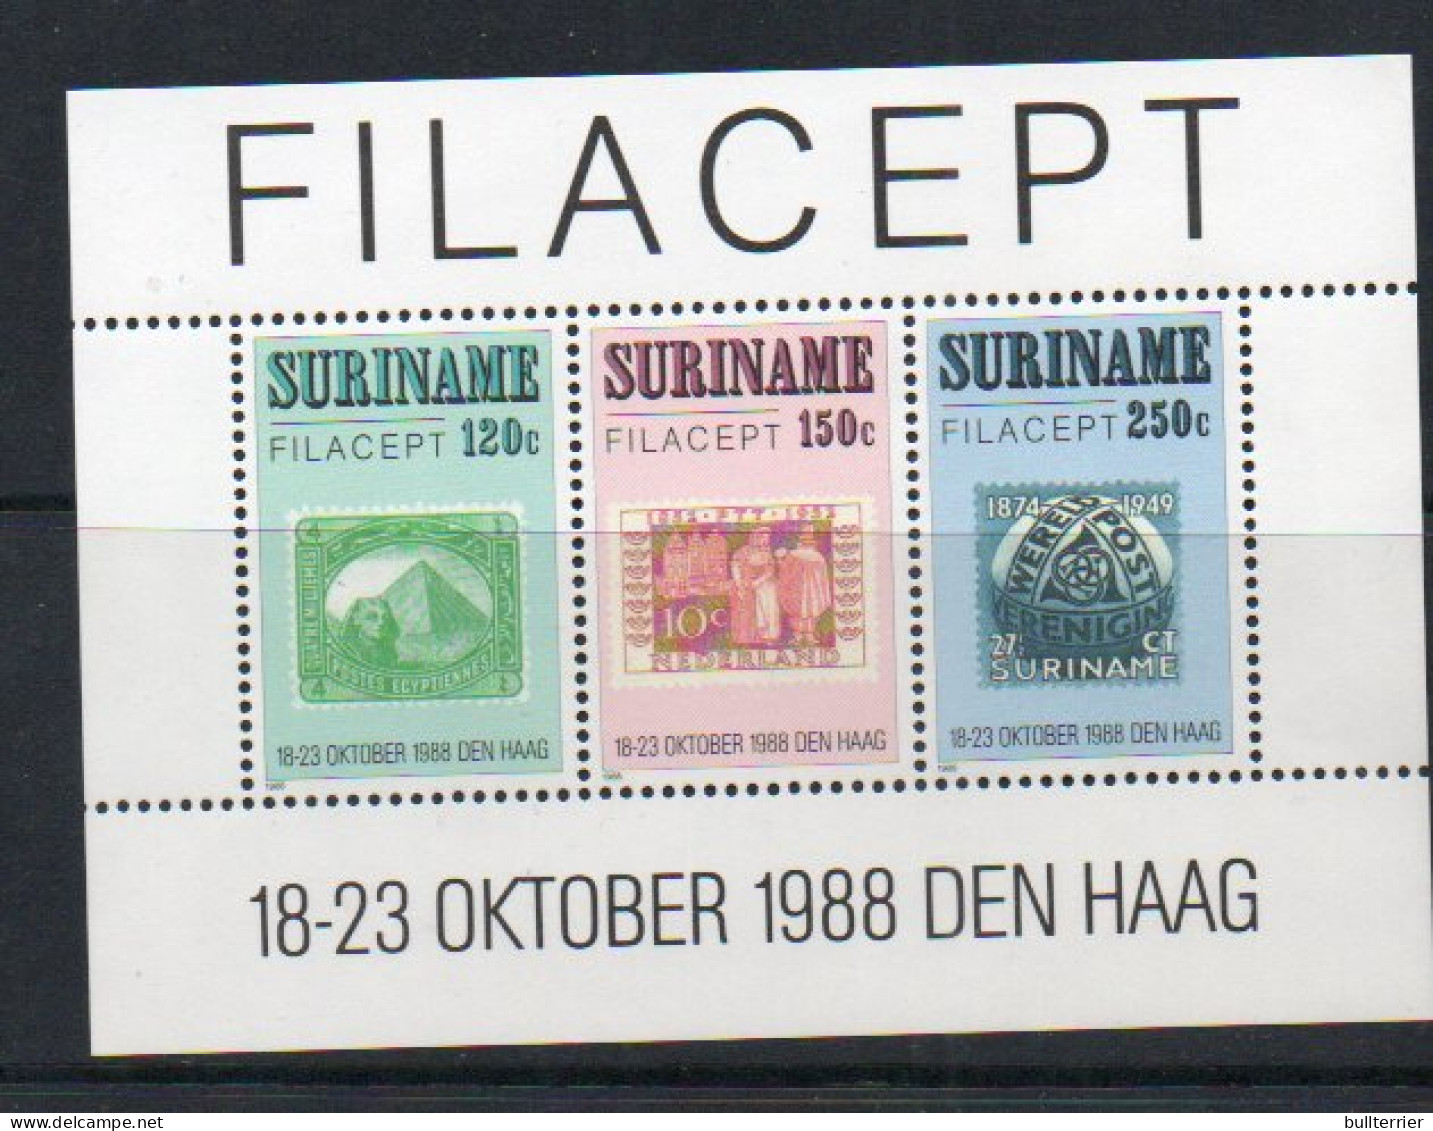 STAMPS ON STAMPS - SURINAM - 1988- FILACEPT SOUVENIR   MINT NEVER HINGED, SG CAT £18 - Timbres Sur Timbres